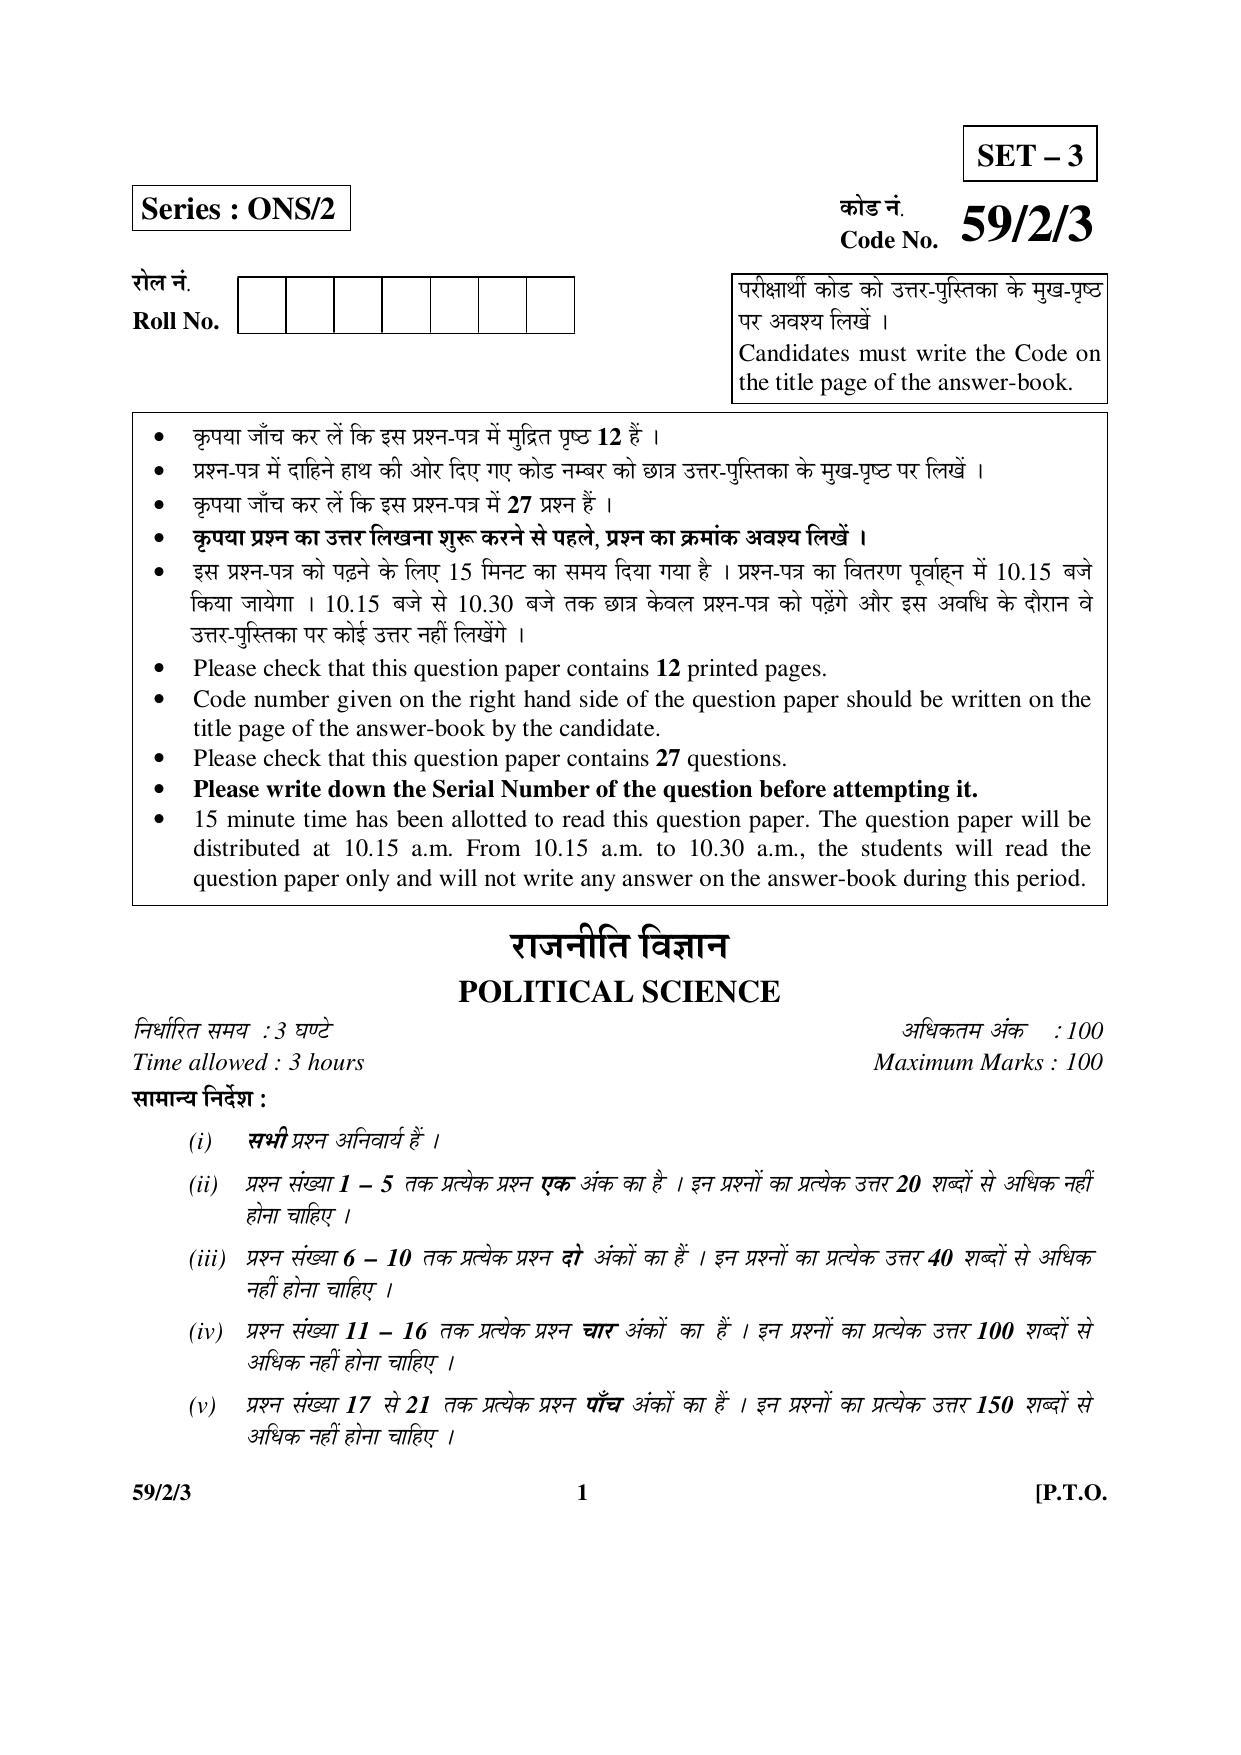 CBSE Class 12 59-2-3 _Political Science 2016 Question Paper - Page 1